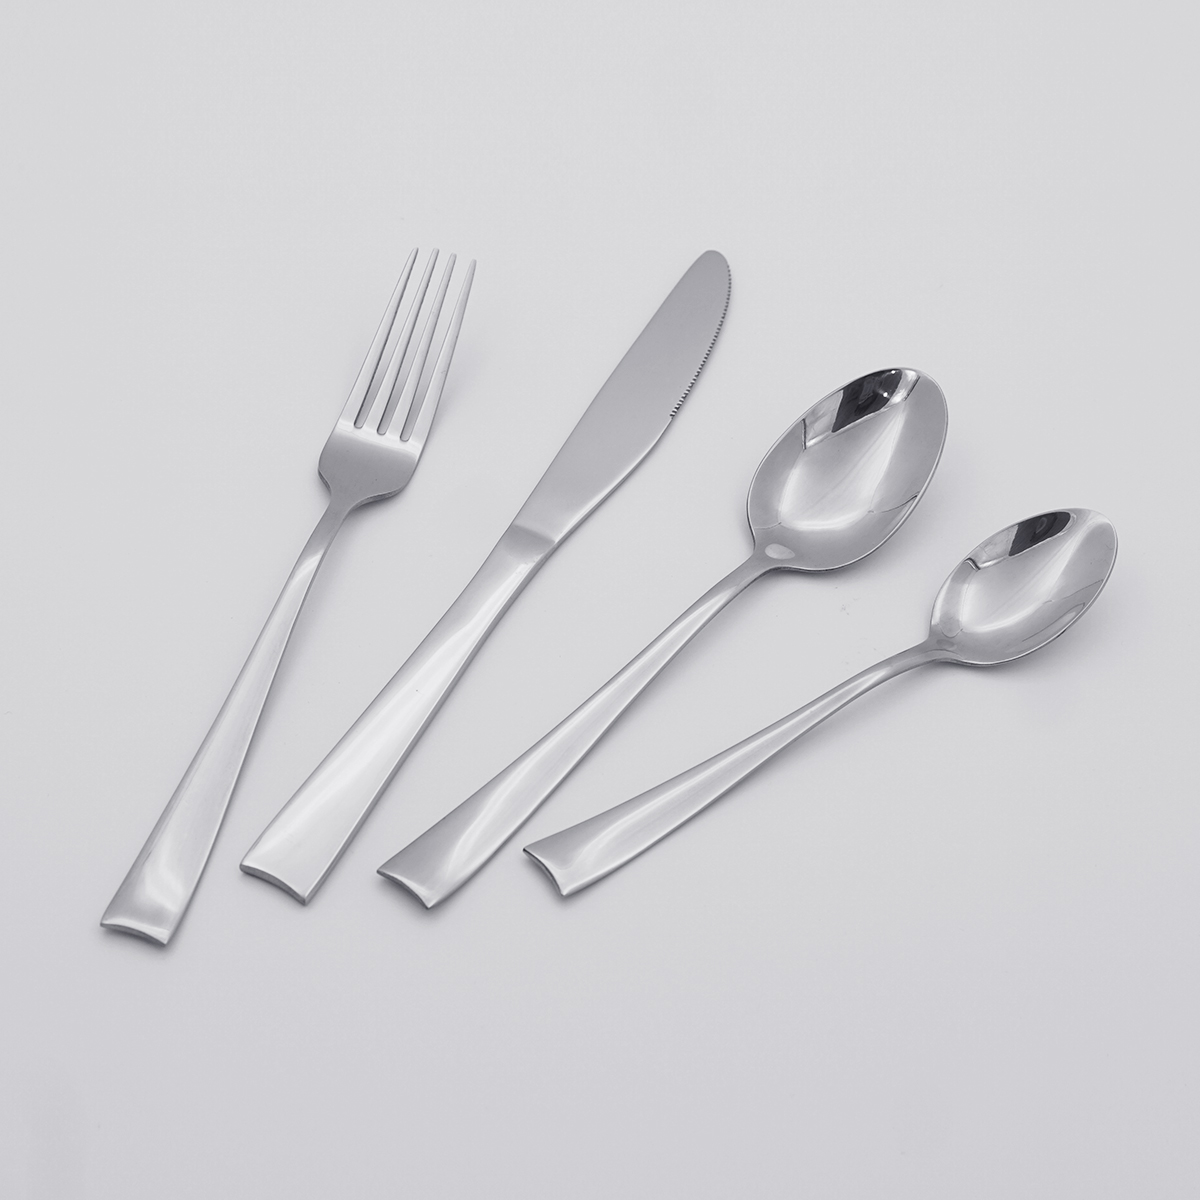 Hot Sell Creative 304 Stainless Steel Silverware Flatware Cutlery Sets for Restaurant